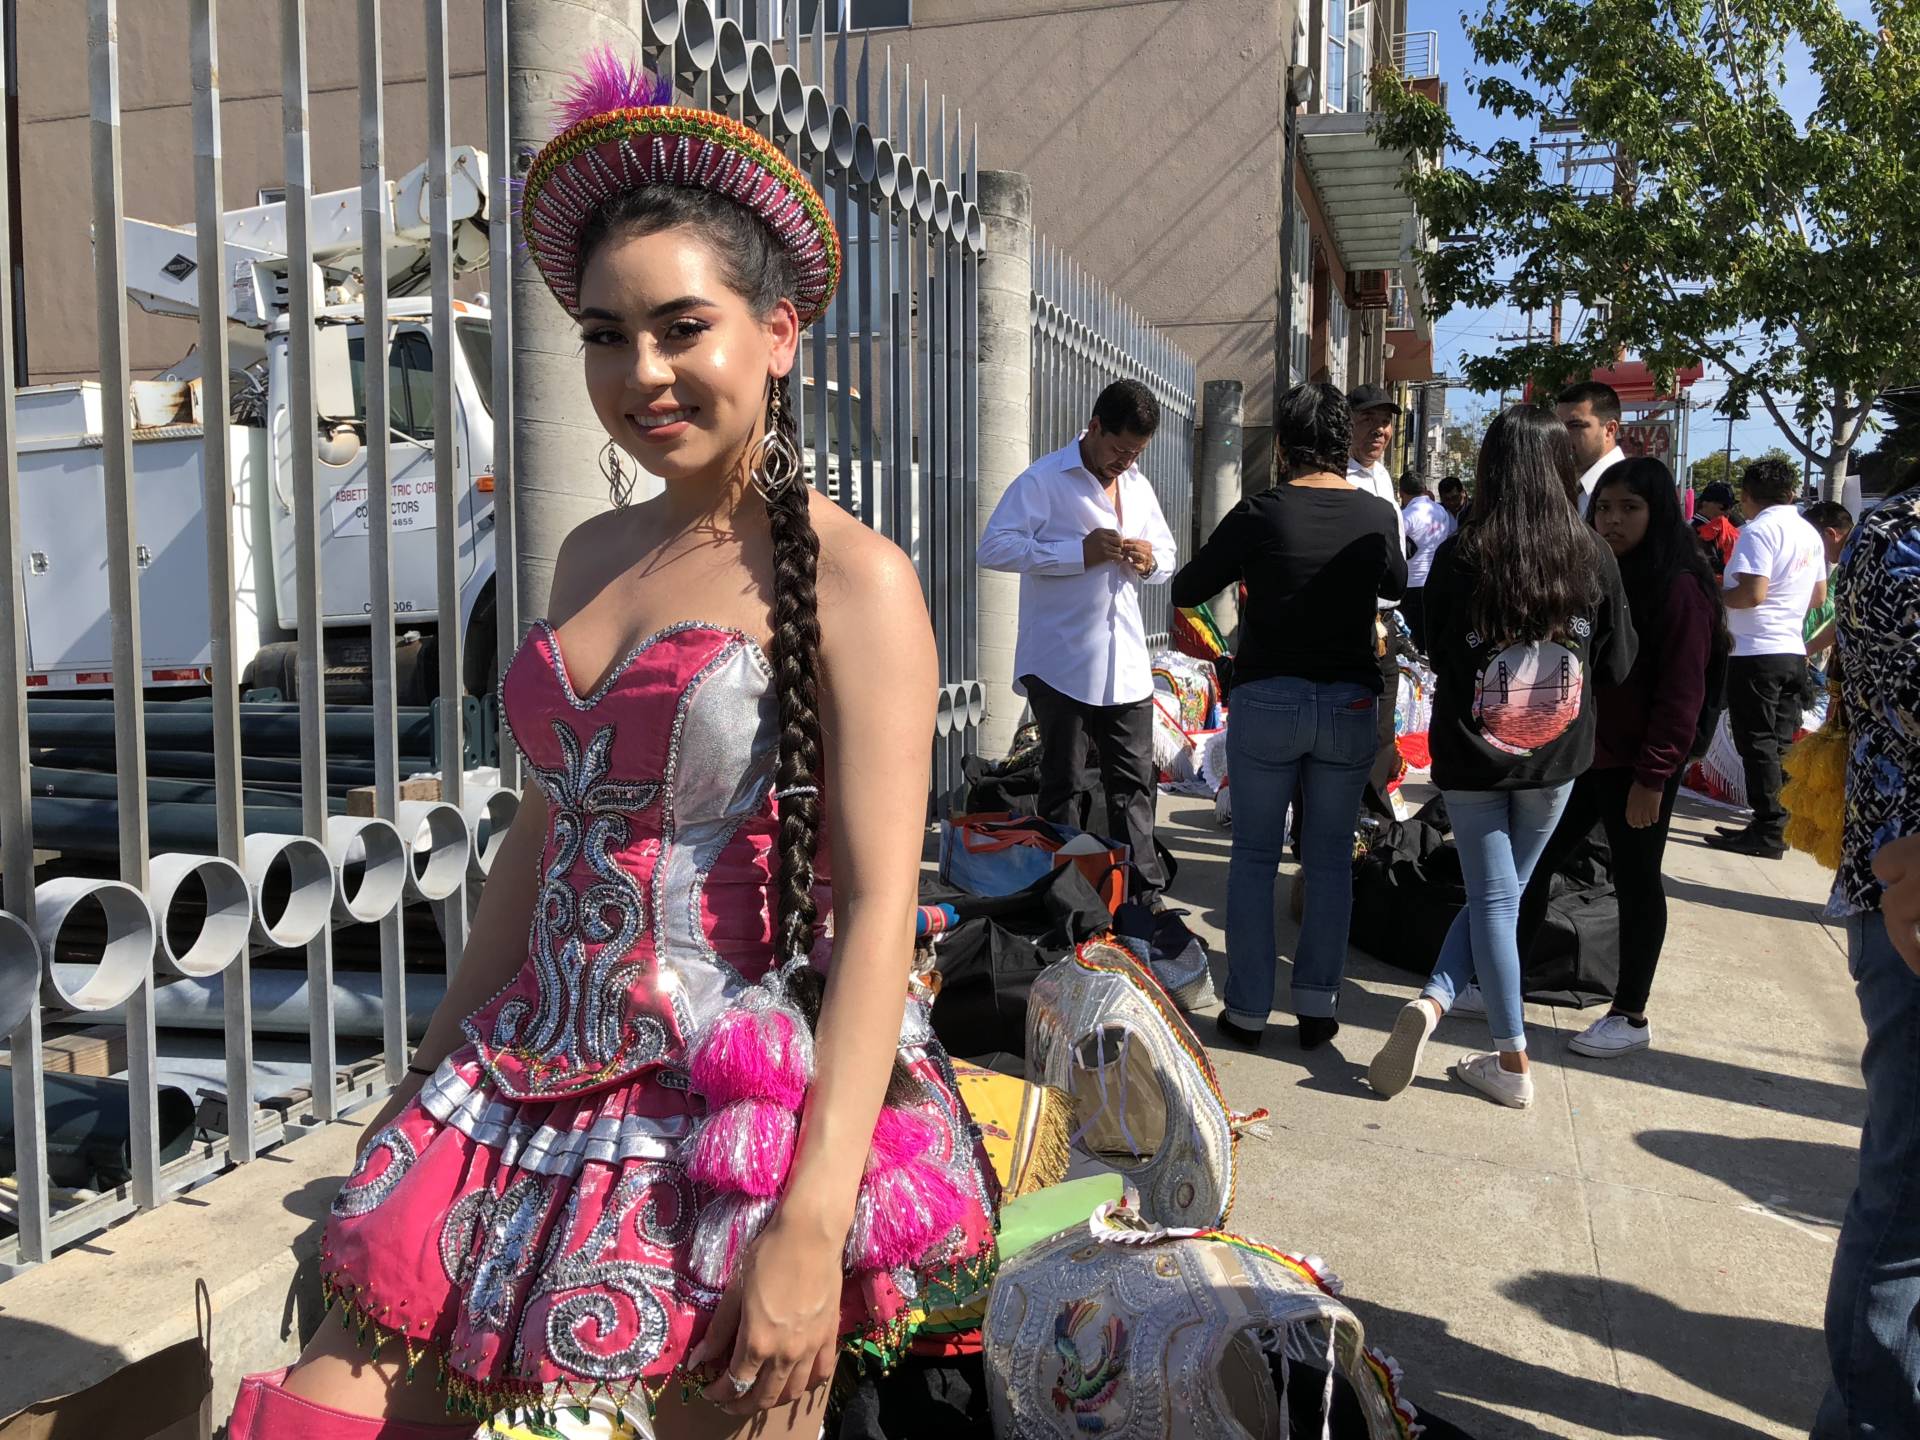 PHOTOS: Carnaval Takes Over the Mission with Music, Dance | KQED